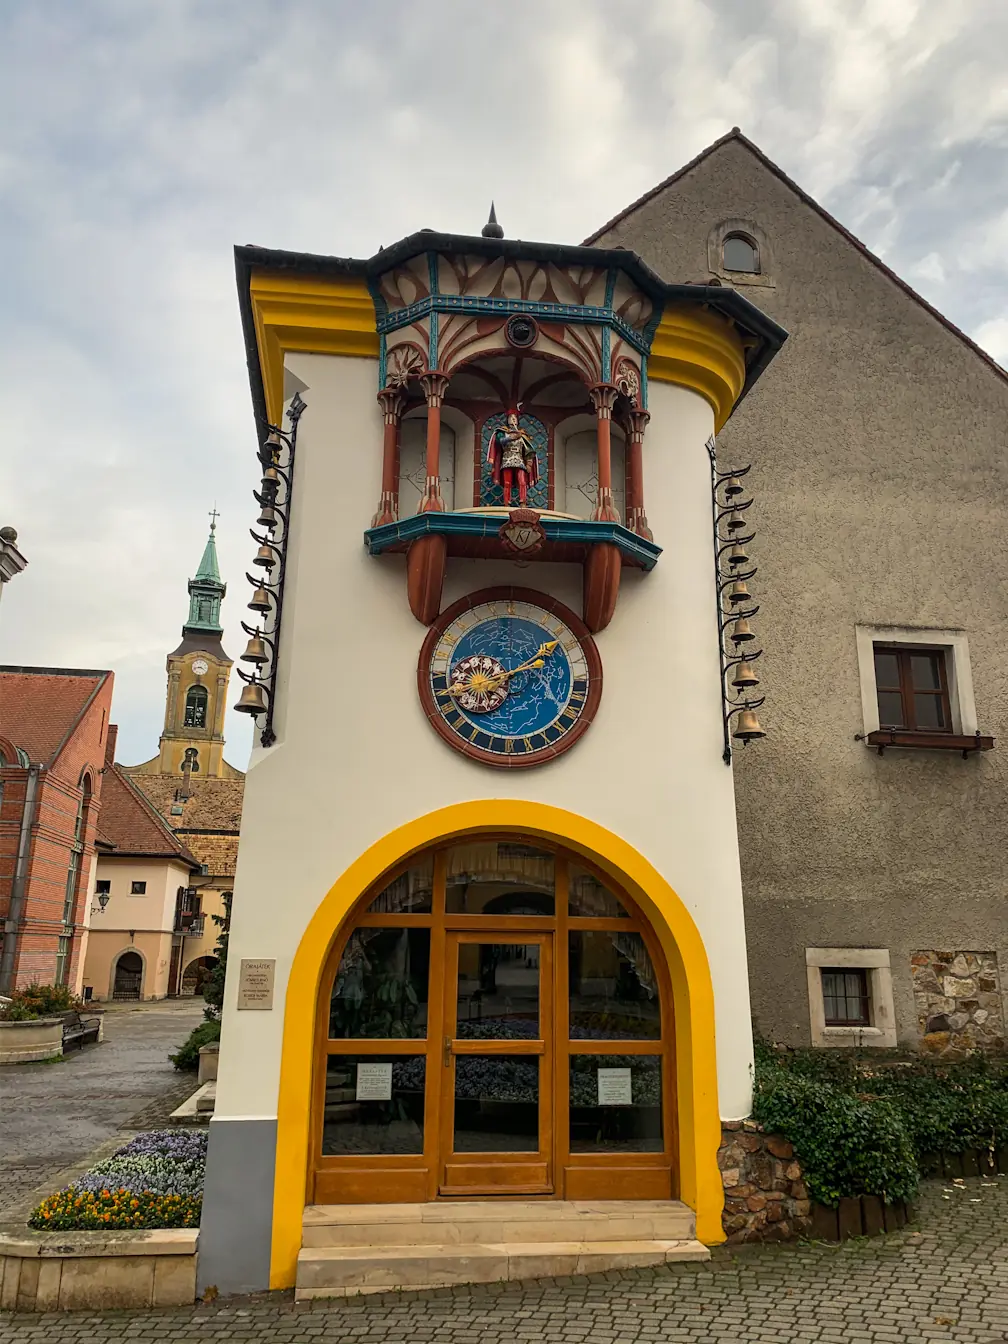 An old tower with an astrological clock. There is a figure of a man with a fancy costume above the clock.